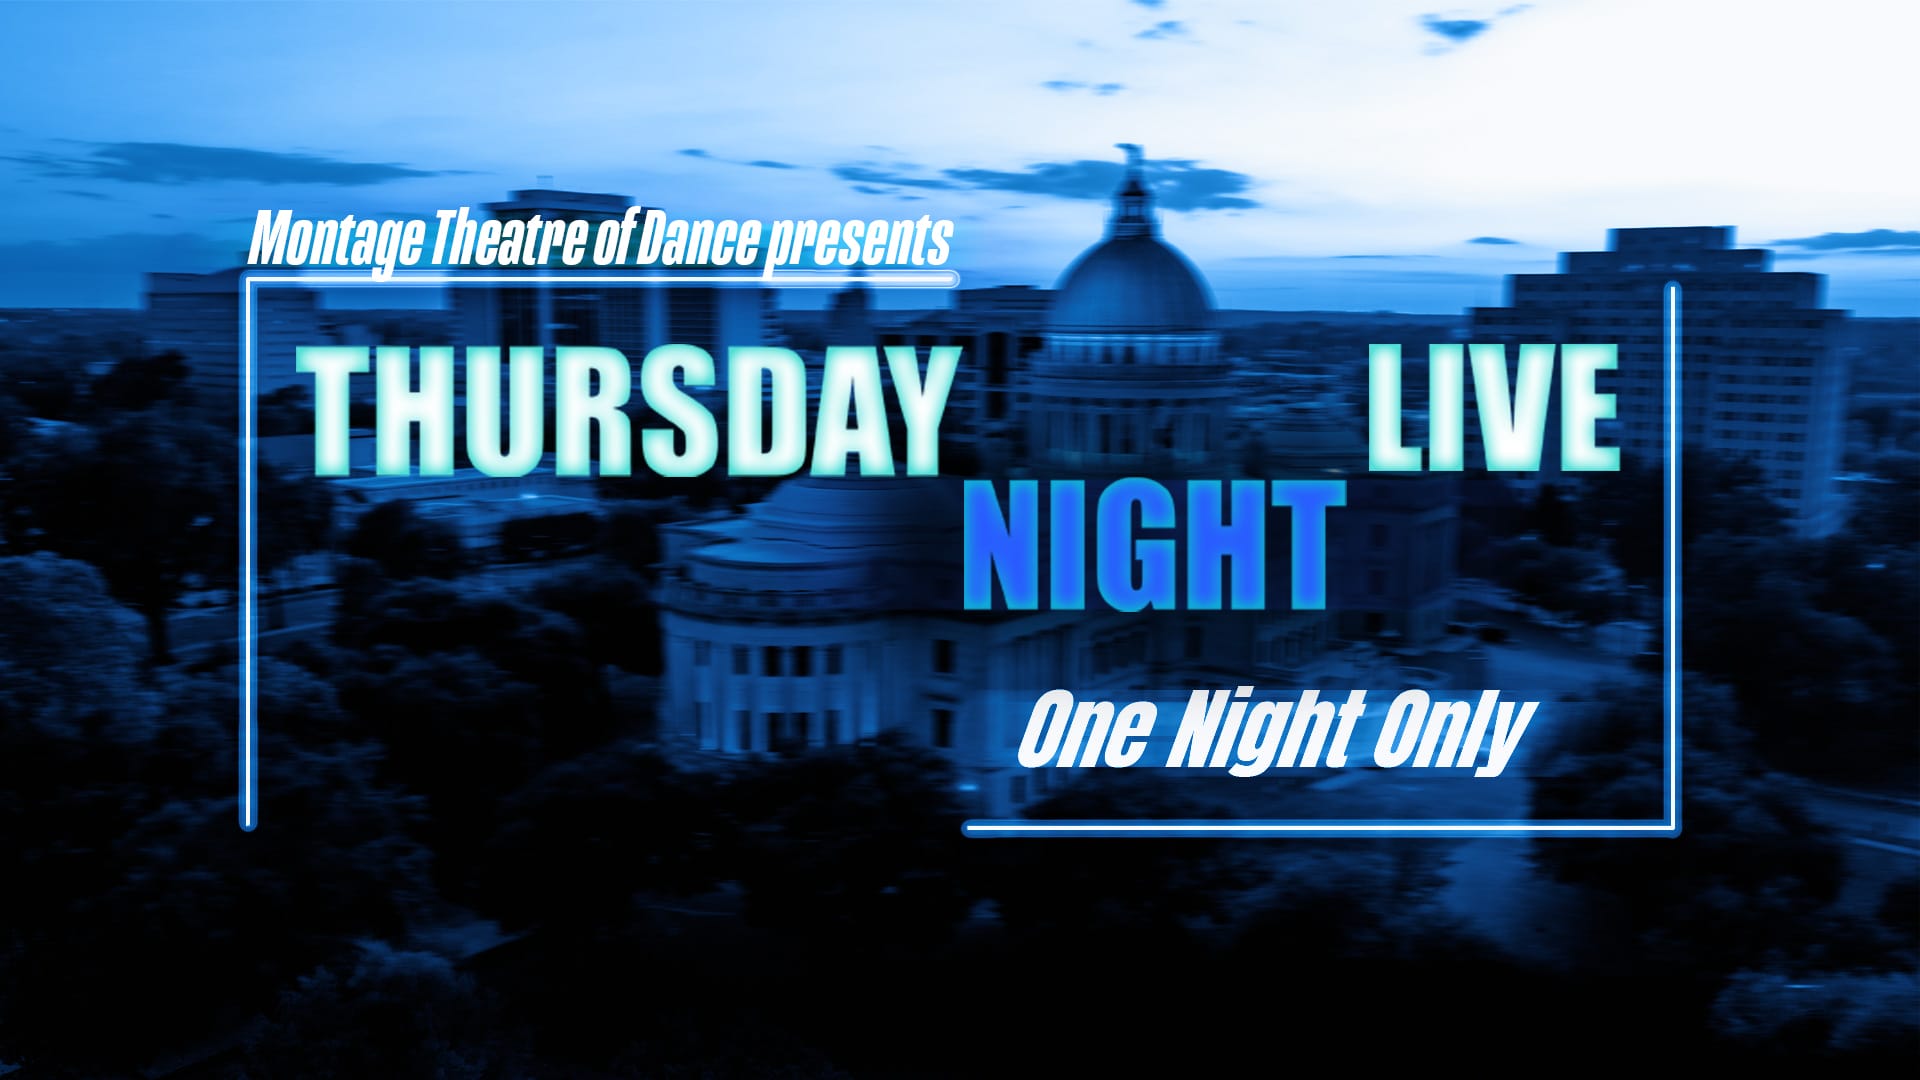 Montage Theatre of Dance presents Thursday Night Live One Night Only